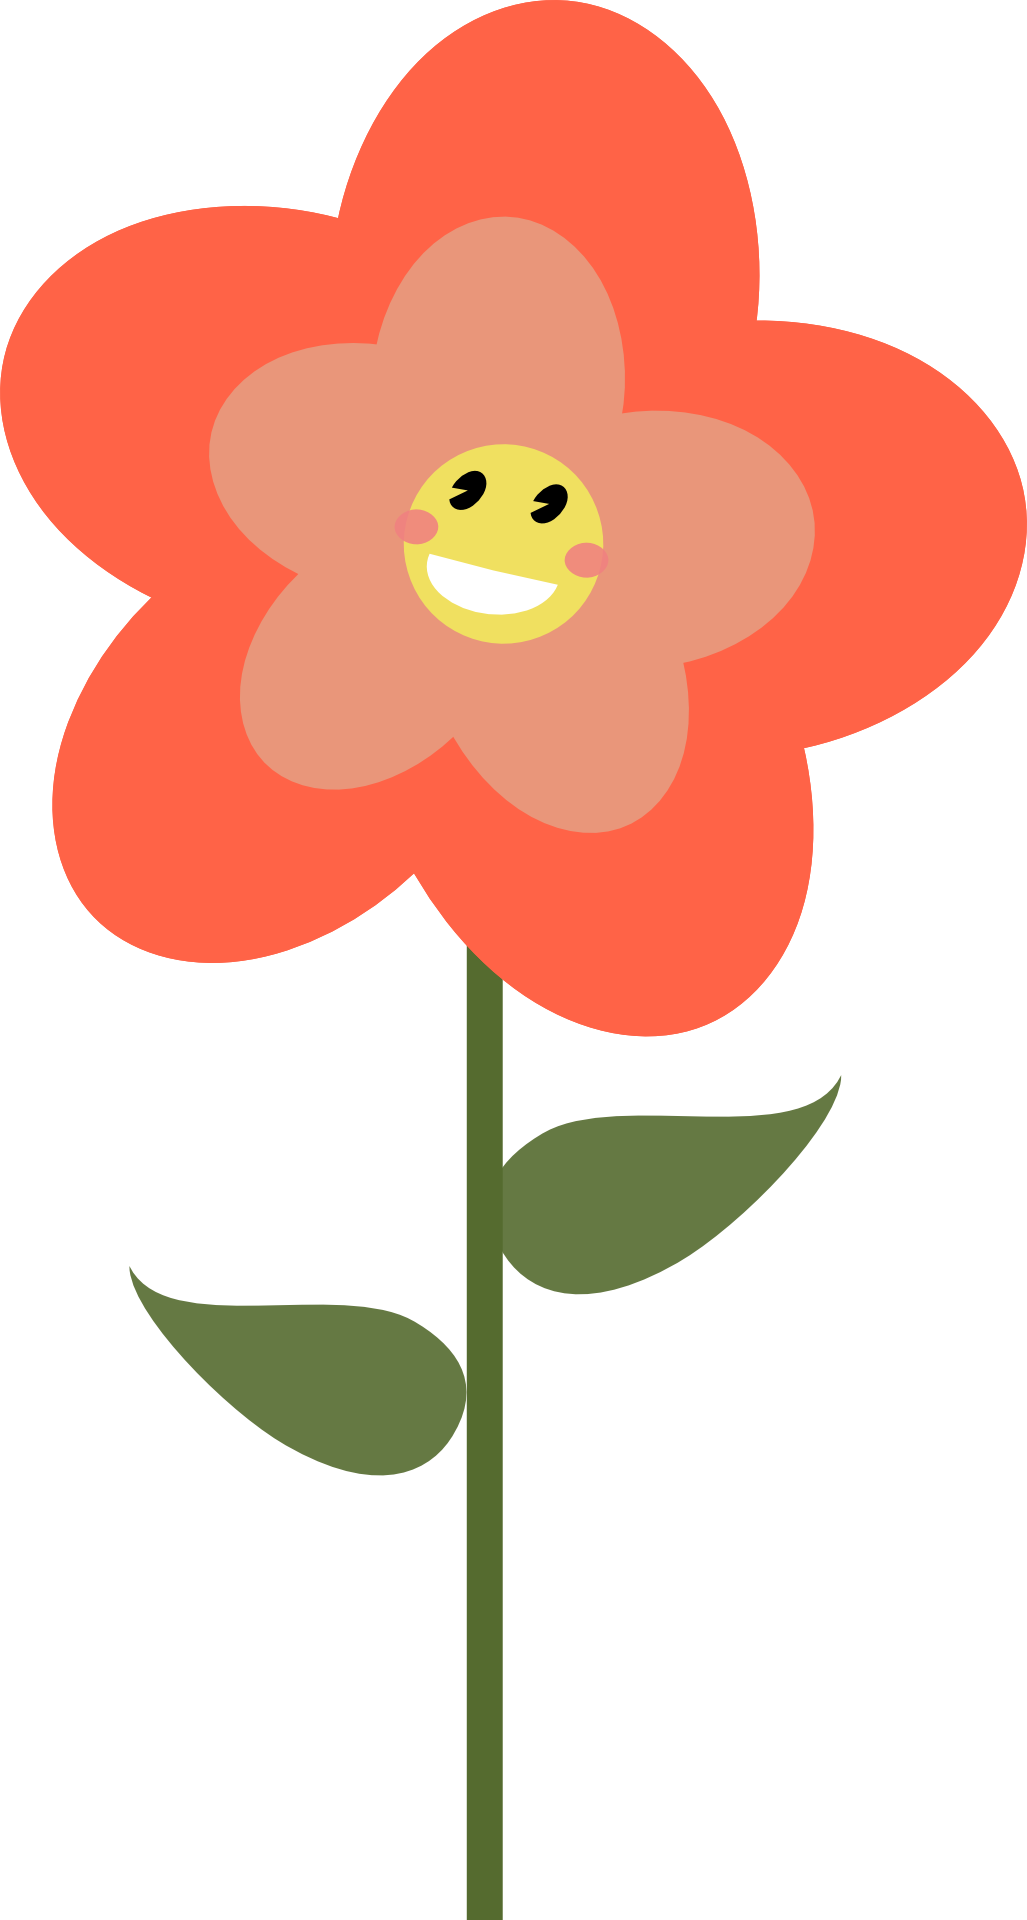 Happy flower drawing free image download